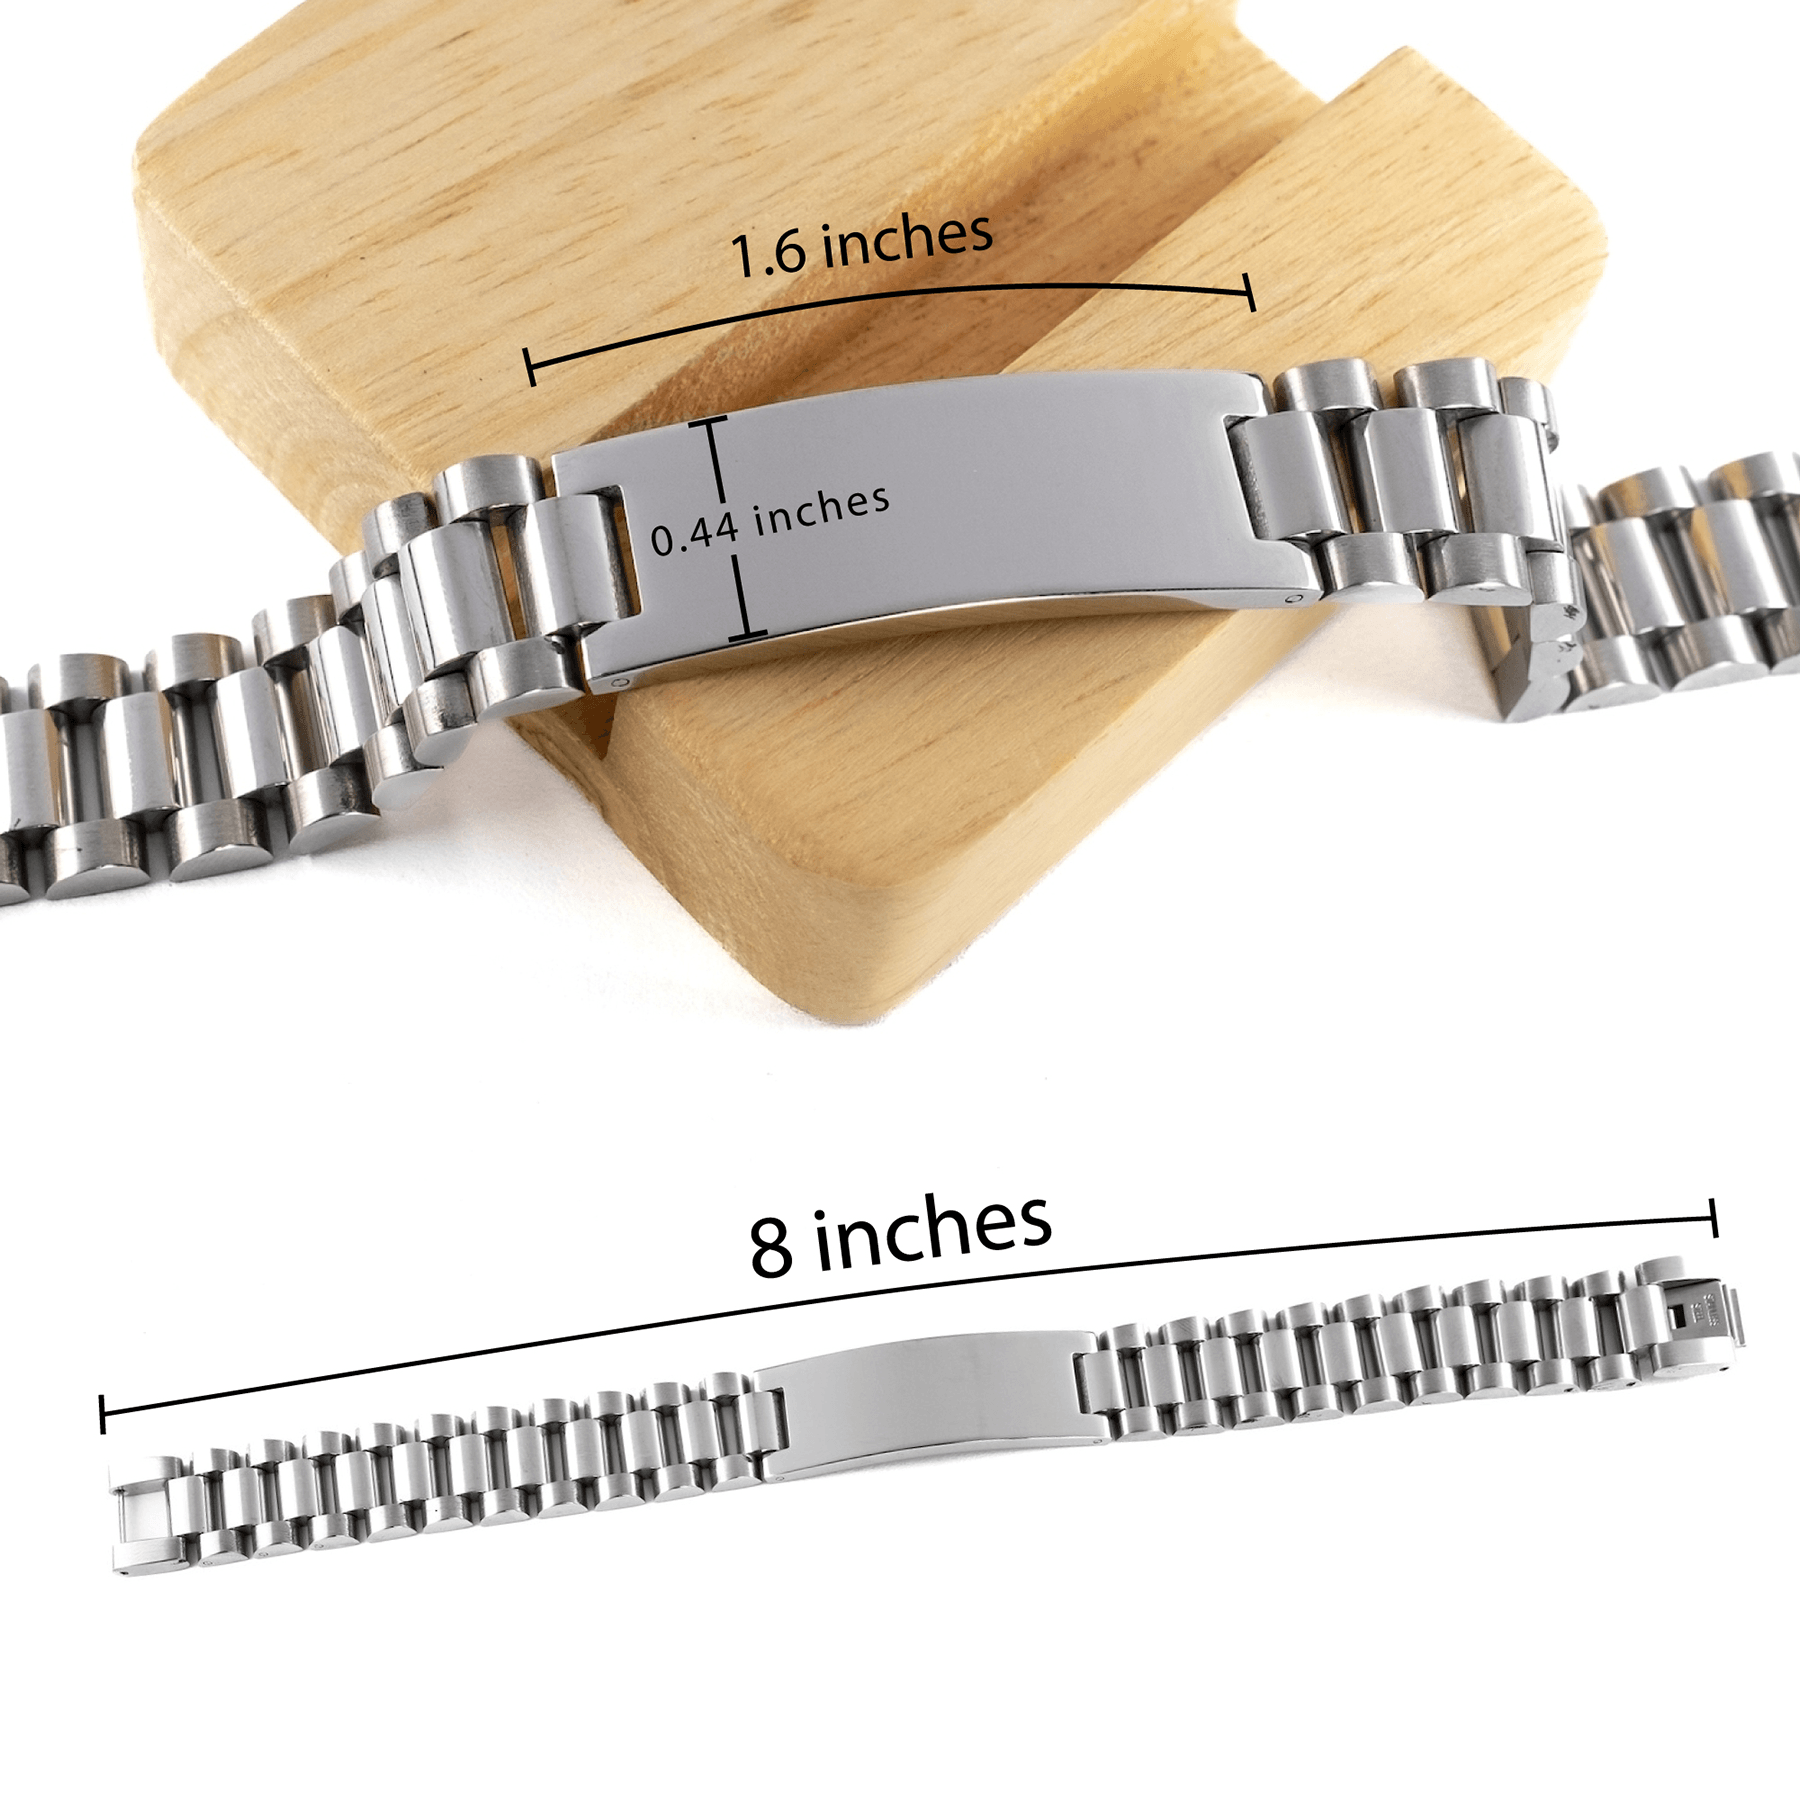 Remarkable Mortician Gifts, Your dedication and hard work, Inspirational Birthday Christmas Unique Ladder Stainless Steel Bracelet For Mortician, Coworkers, Men, Women, Friends - Mallard Moon Gift Shop